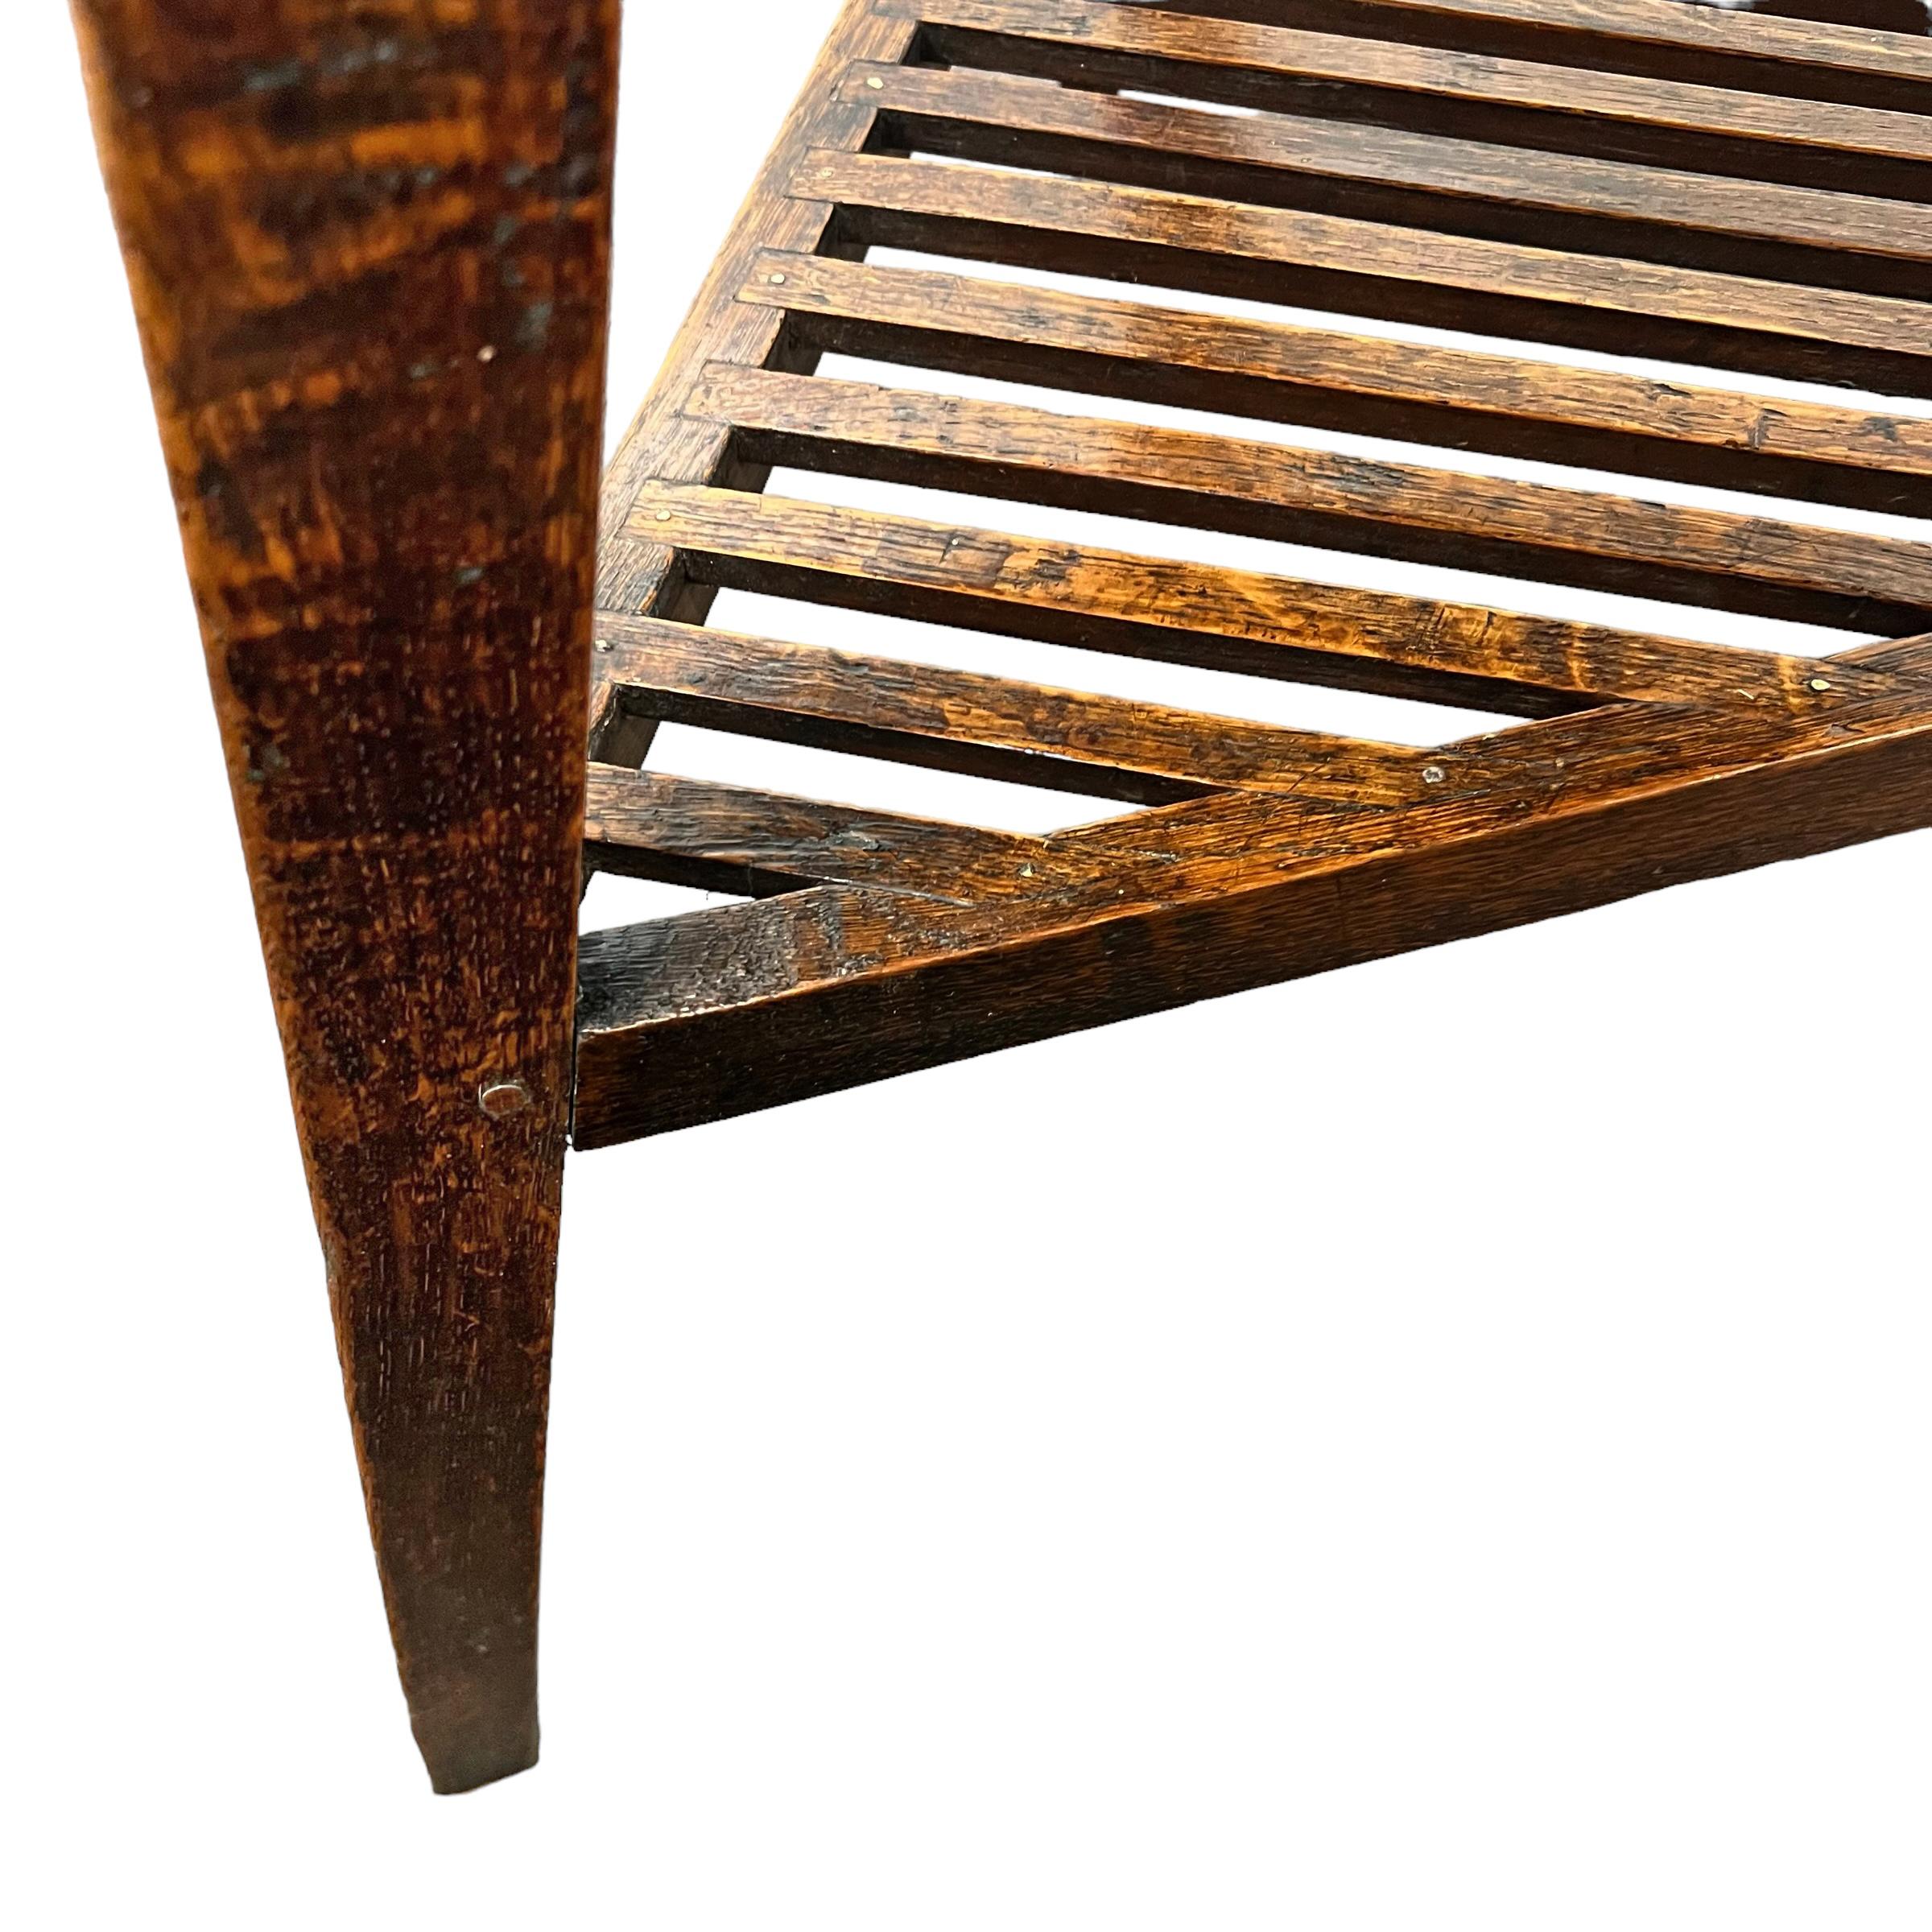 19th Century English Cricket Table with Lattice Shelf For Sale 8